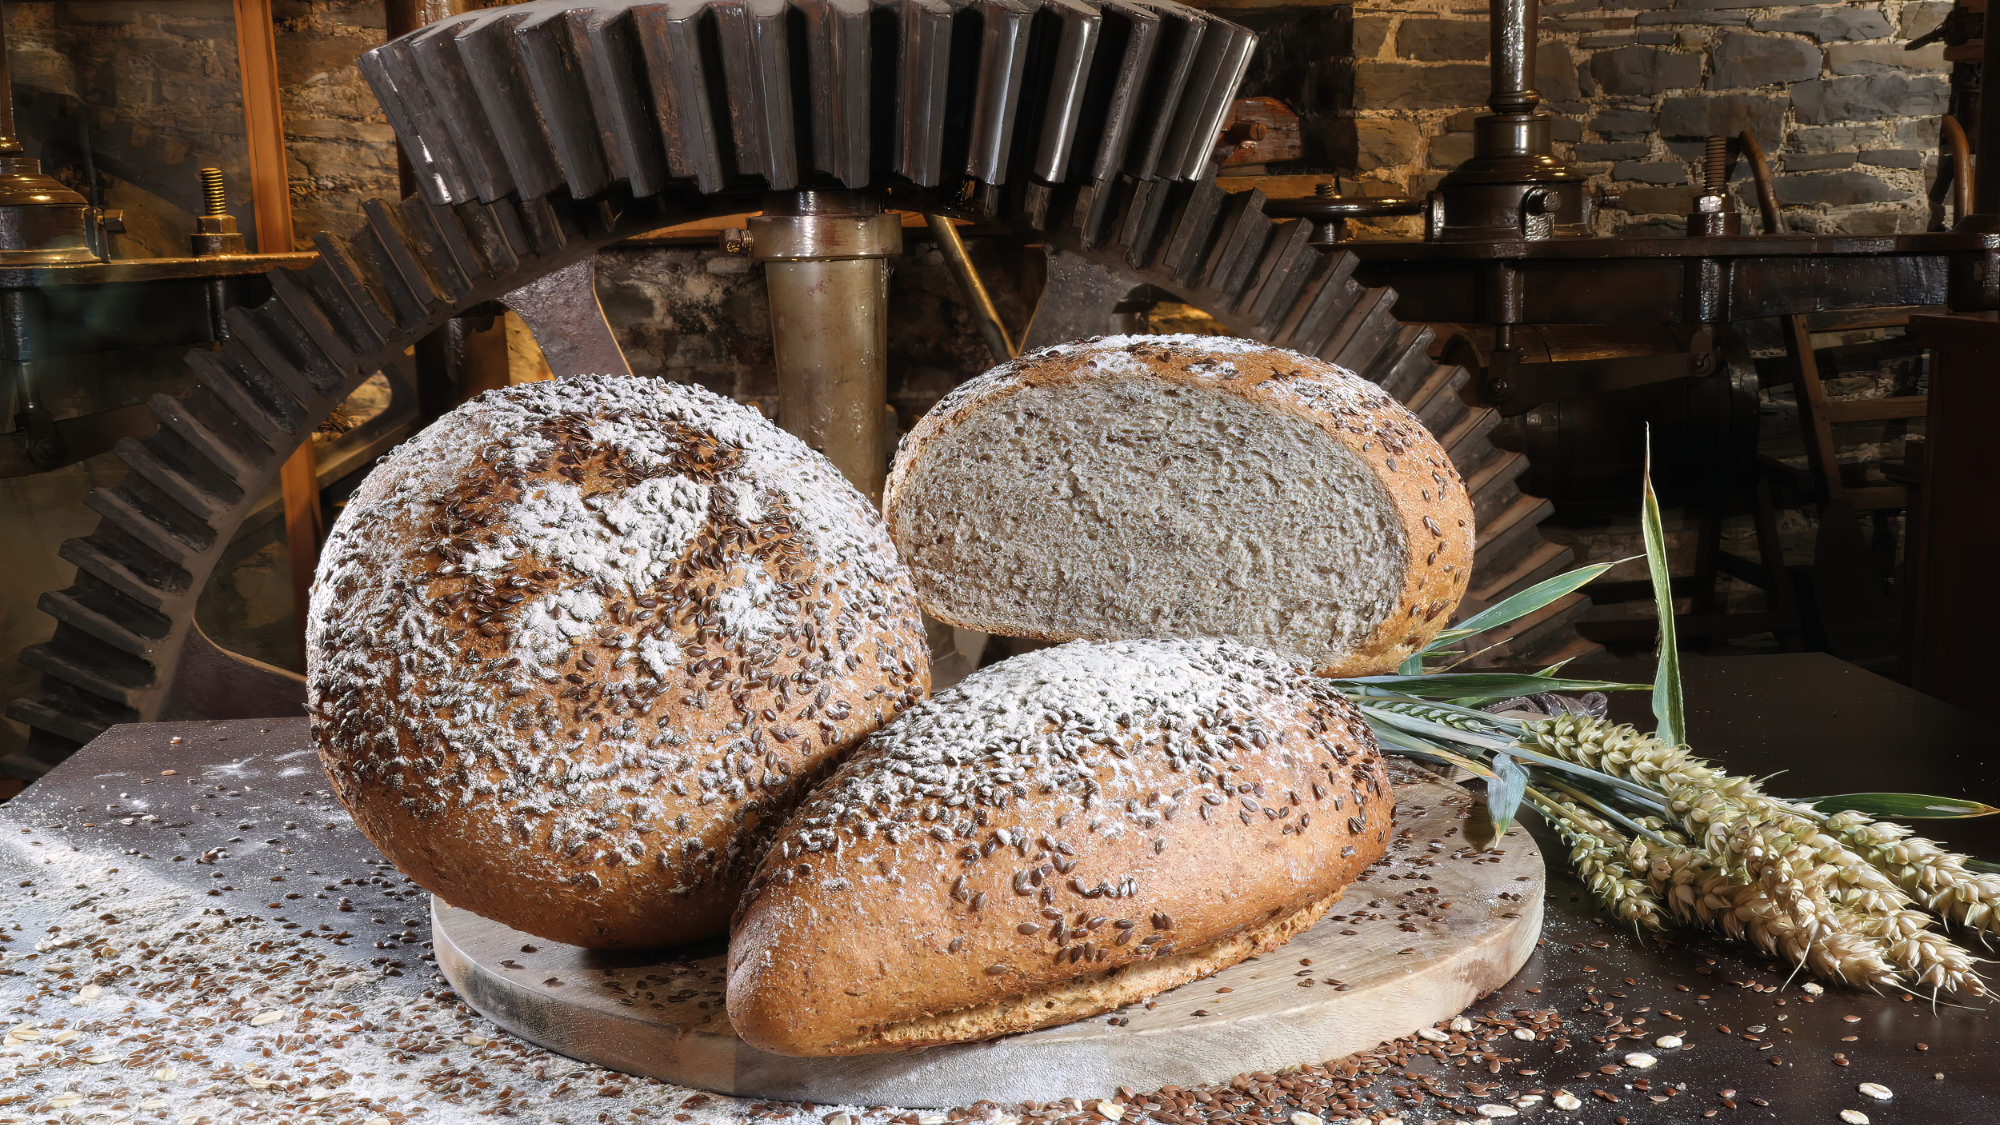 Gcorn mill with delicious artisan breads on the millstone